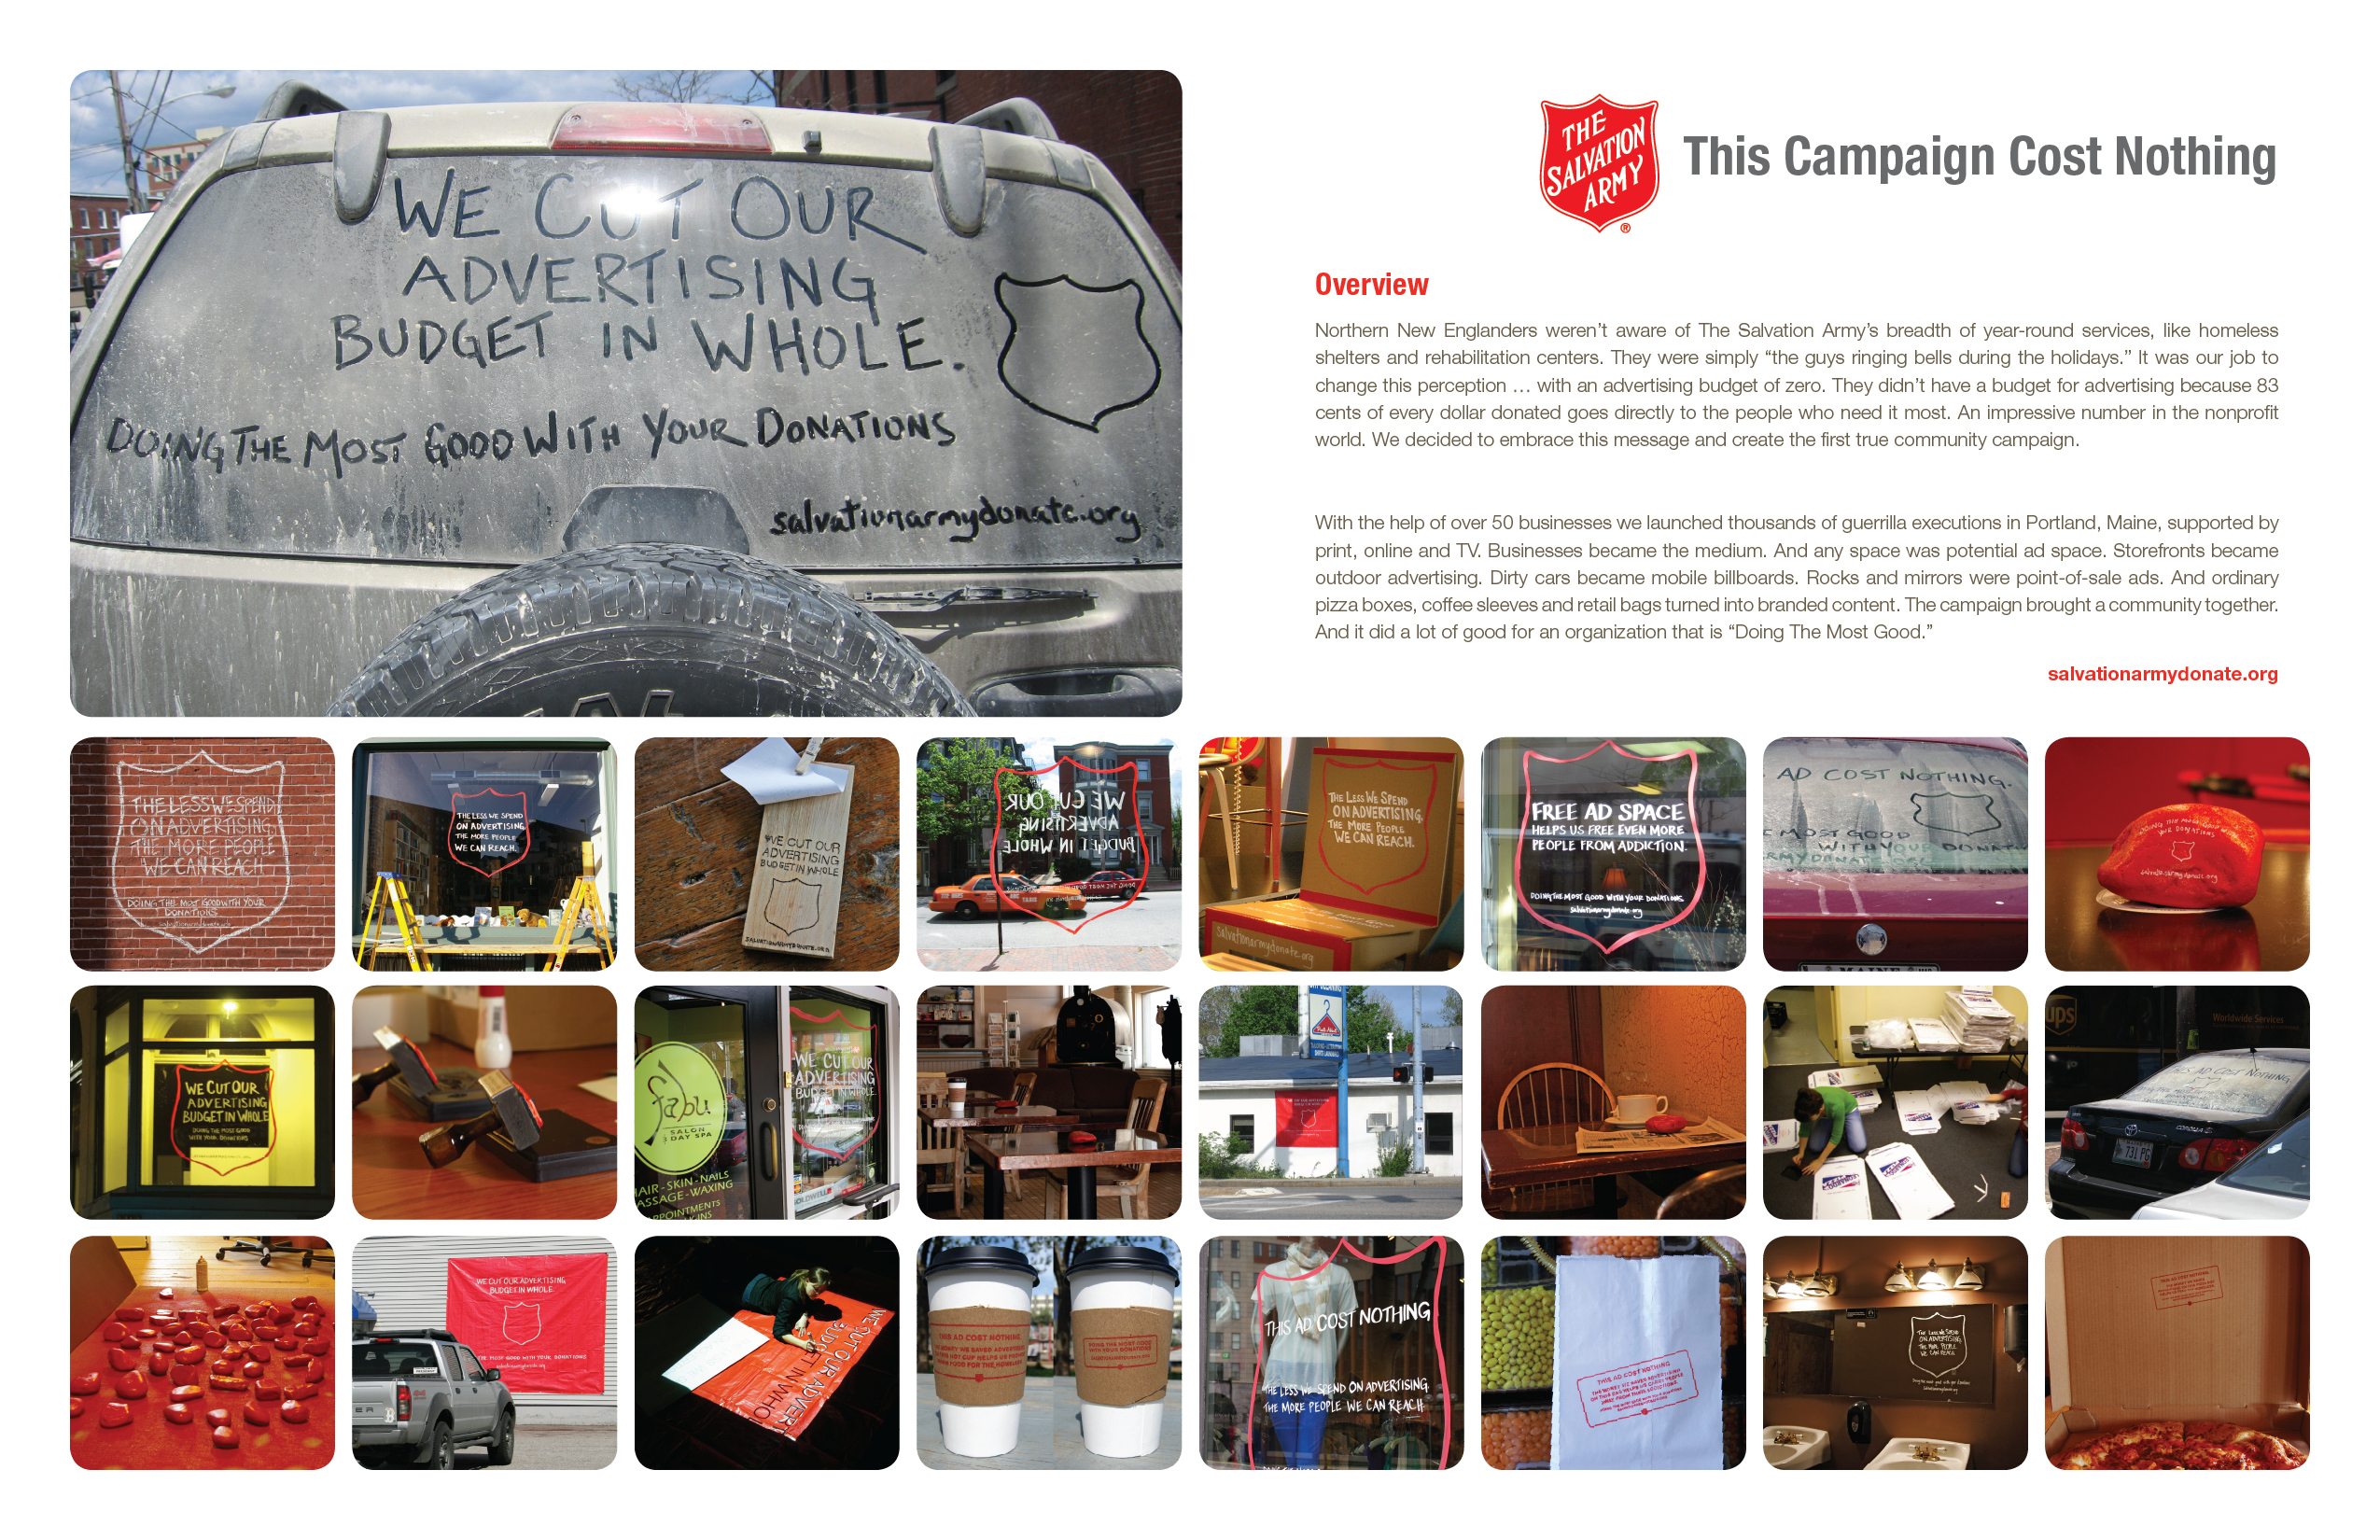 Salvation Army - This Campaign Cost Nothing